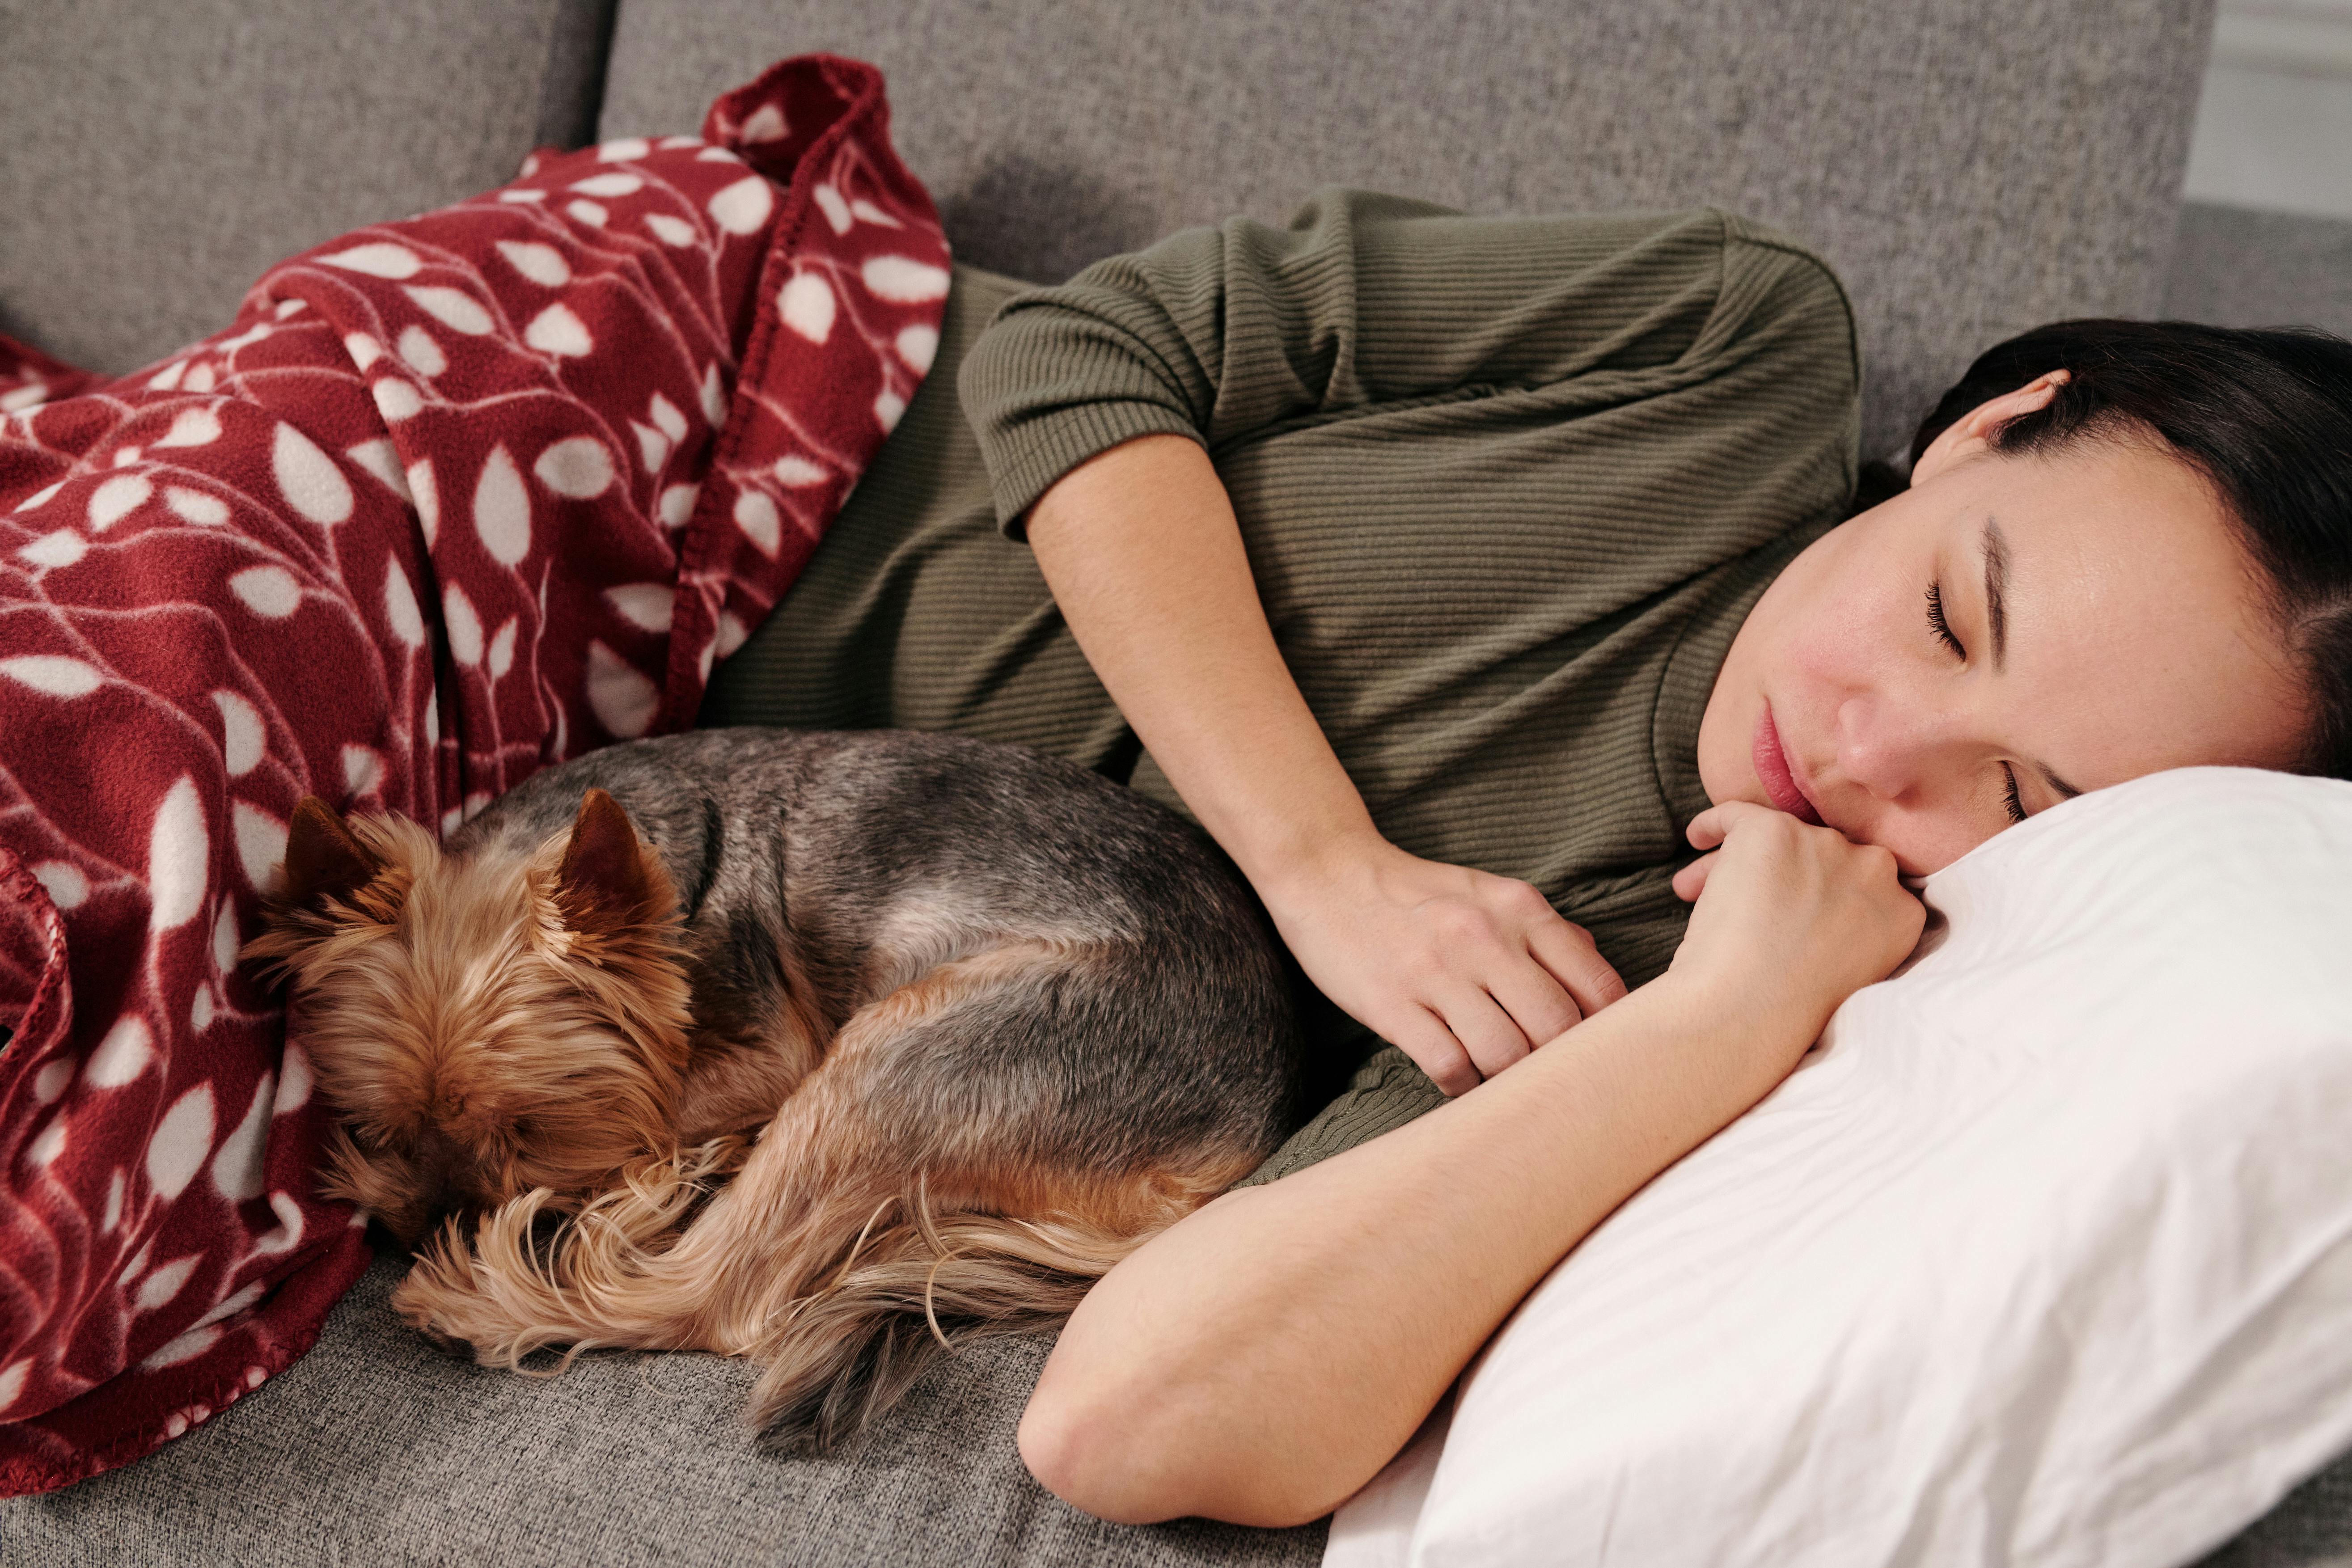 A woman sleeping on a chouch with her dog | Source: Pexels